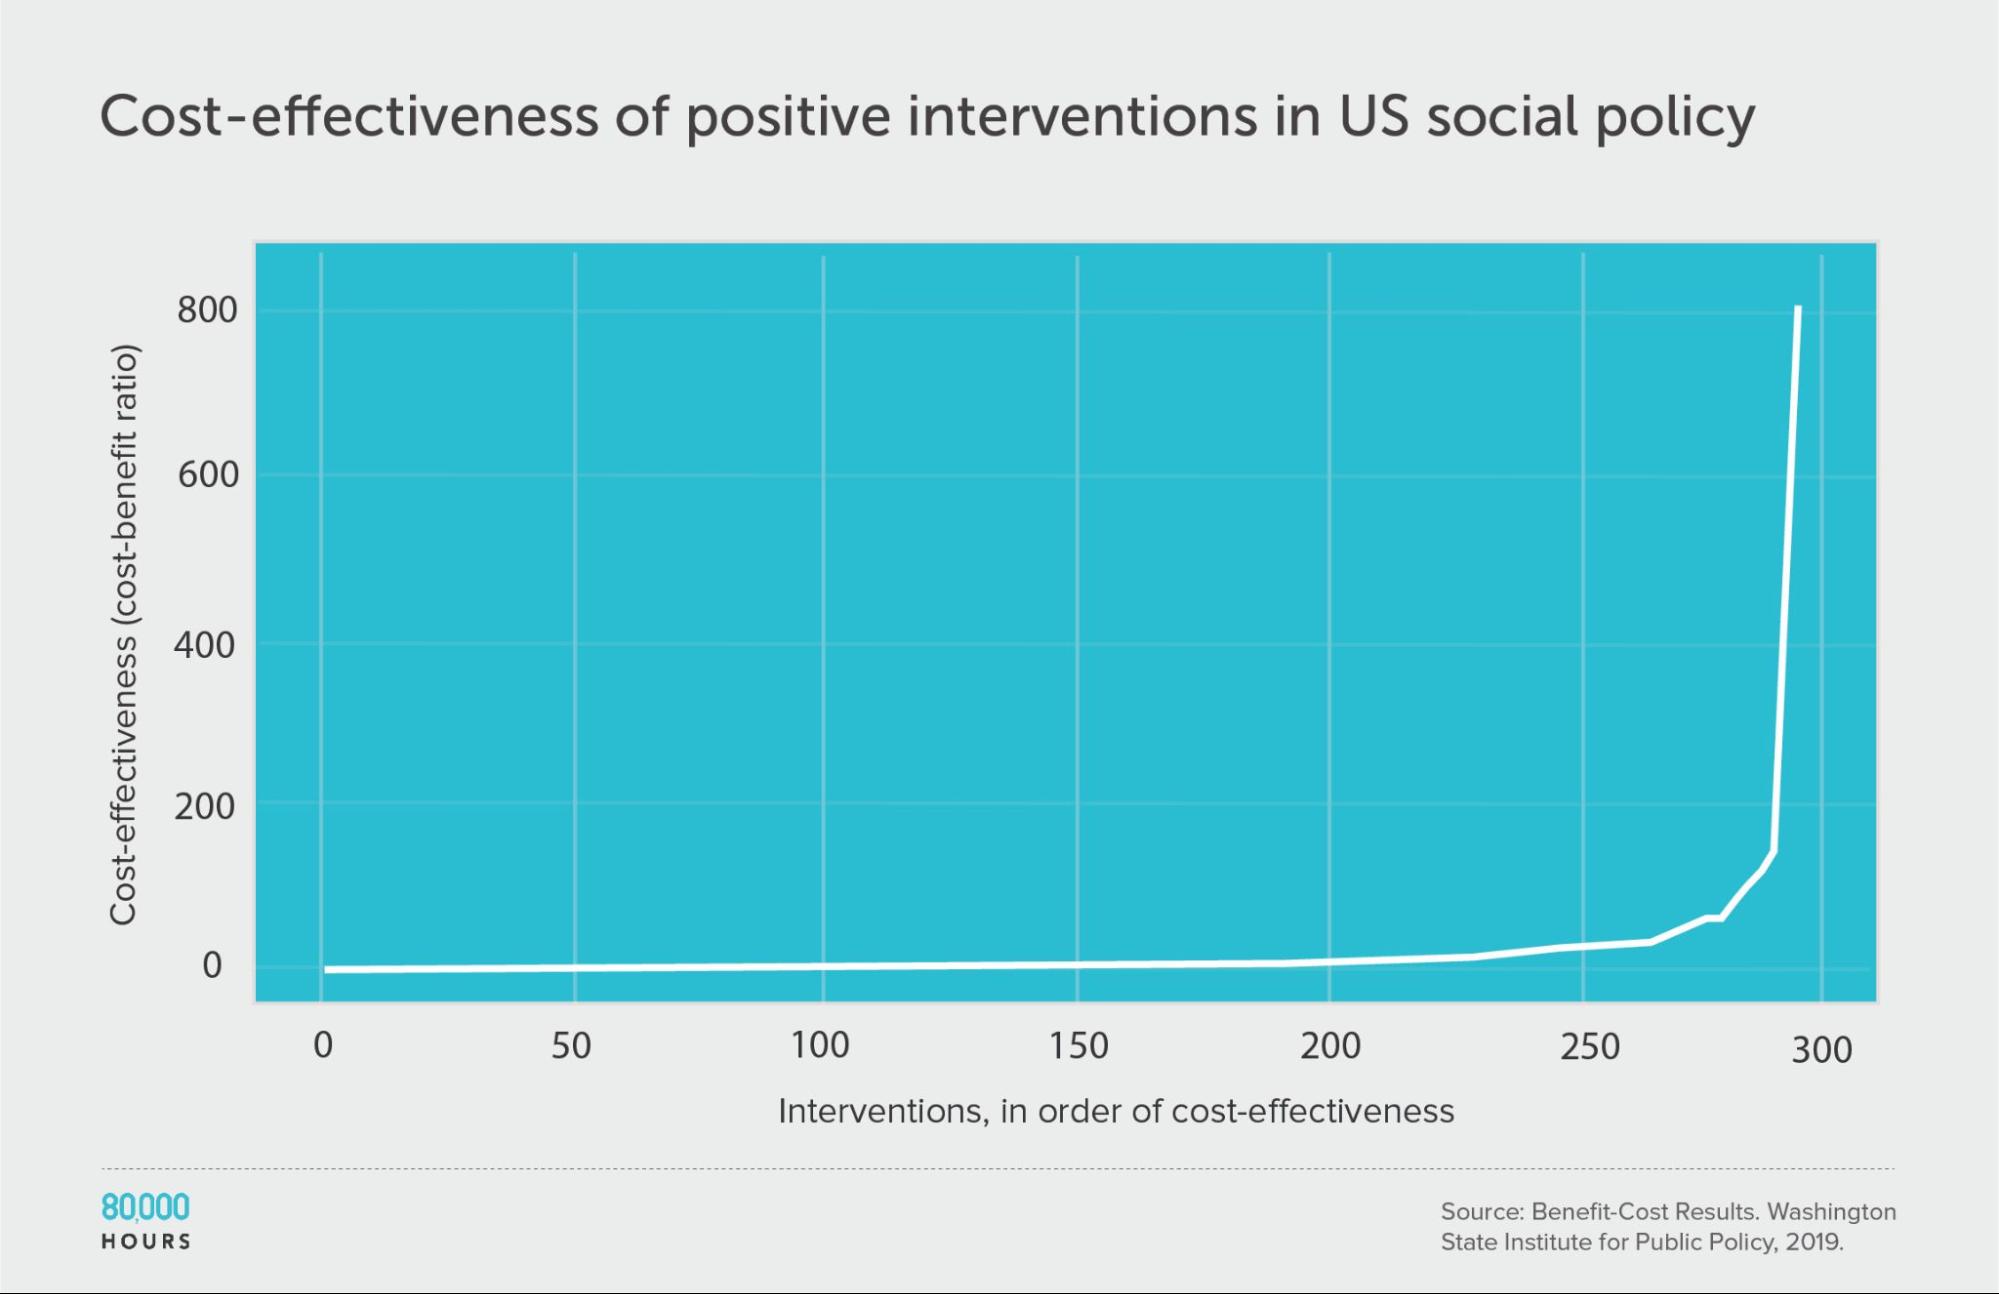 US Social policies, positives only graph